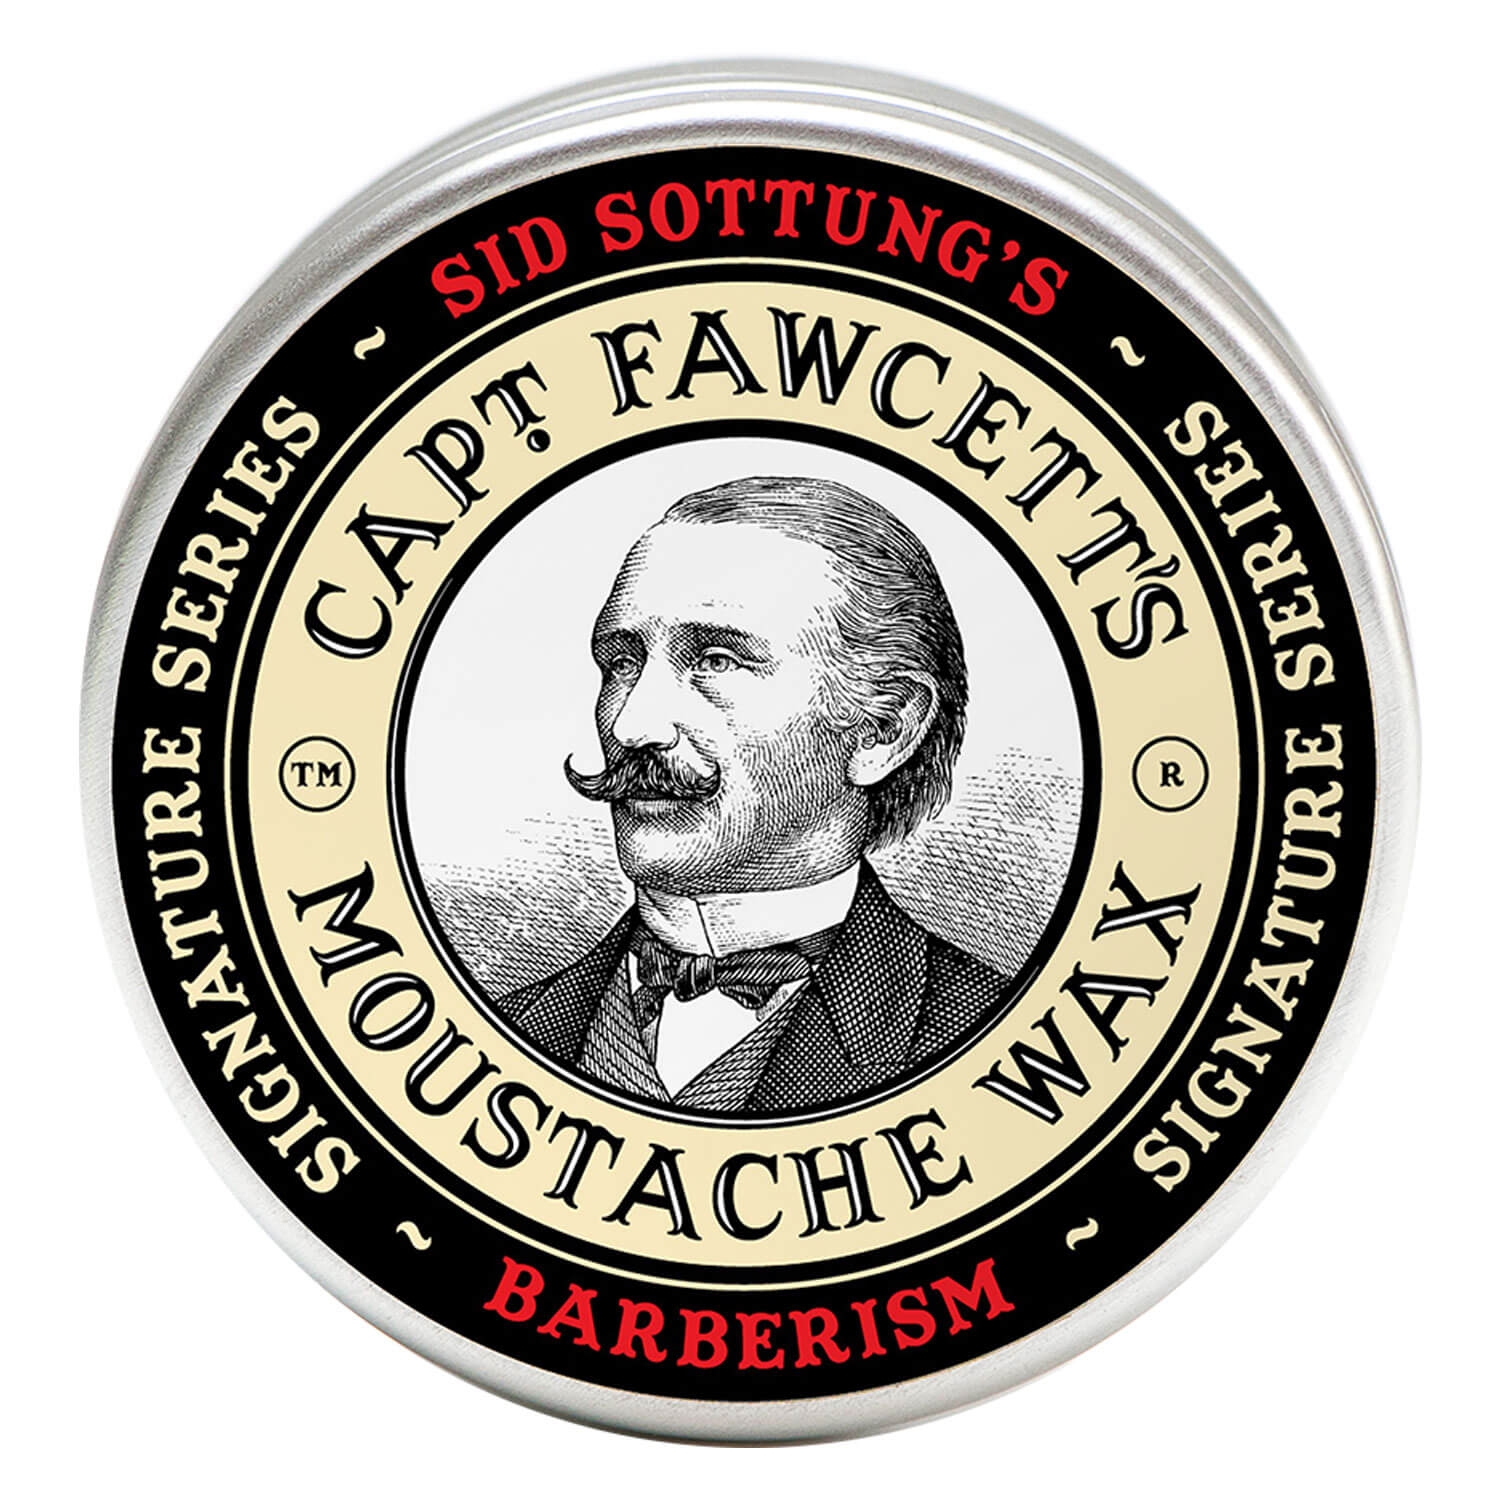 Product image from Capt. Fawcett Care - Sid Sottung's Barberism Moustache Wax